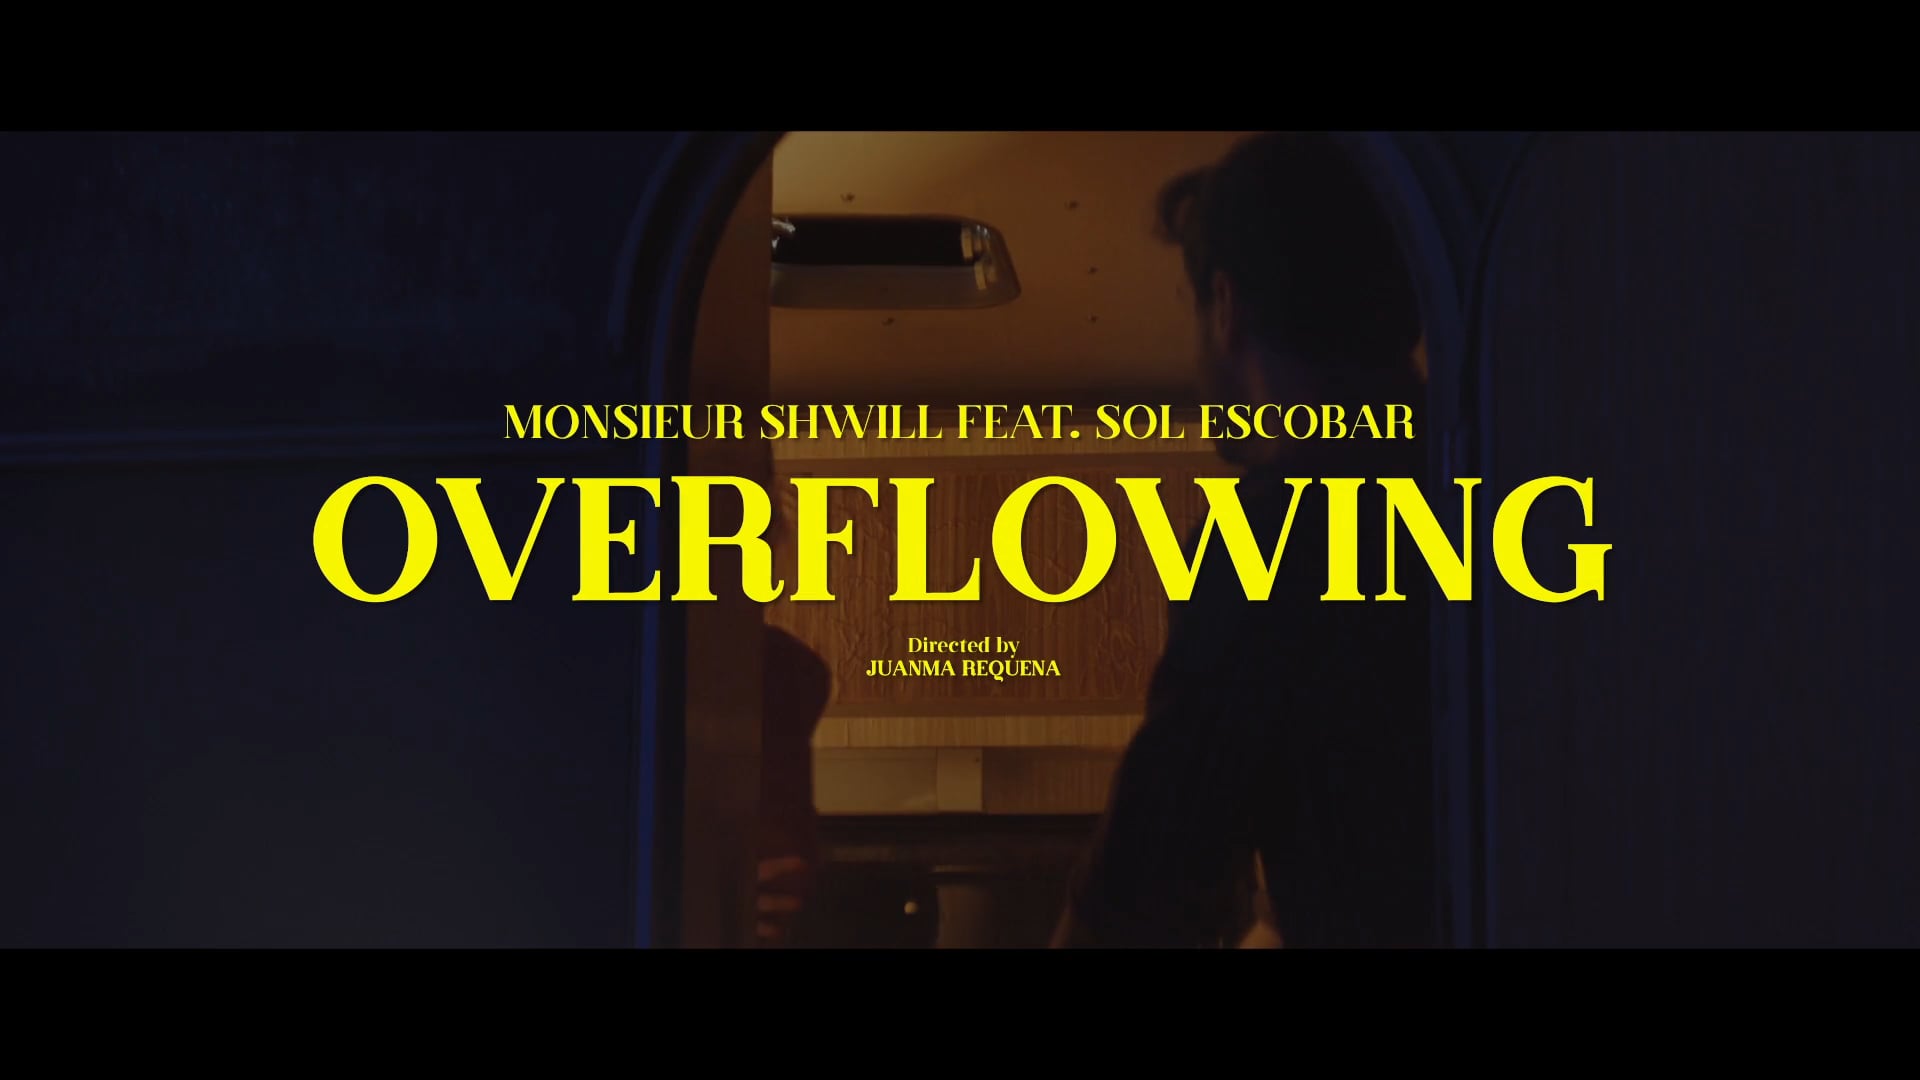 OVERFLOWING Monsieur Shwill Feat. Sol Escobar (Official Video)